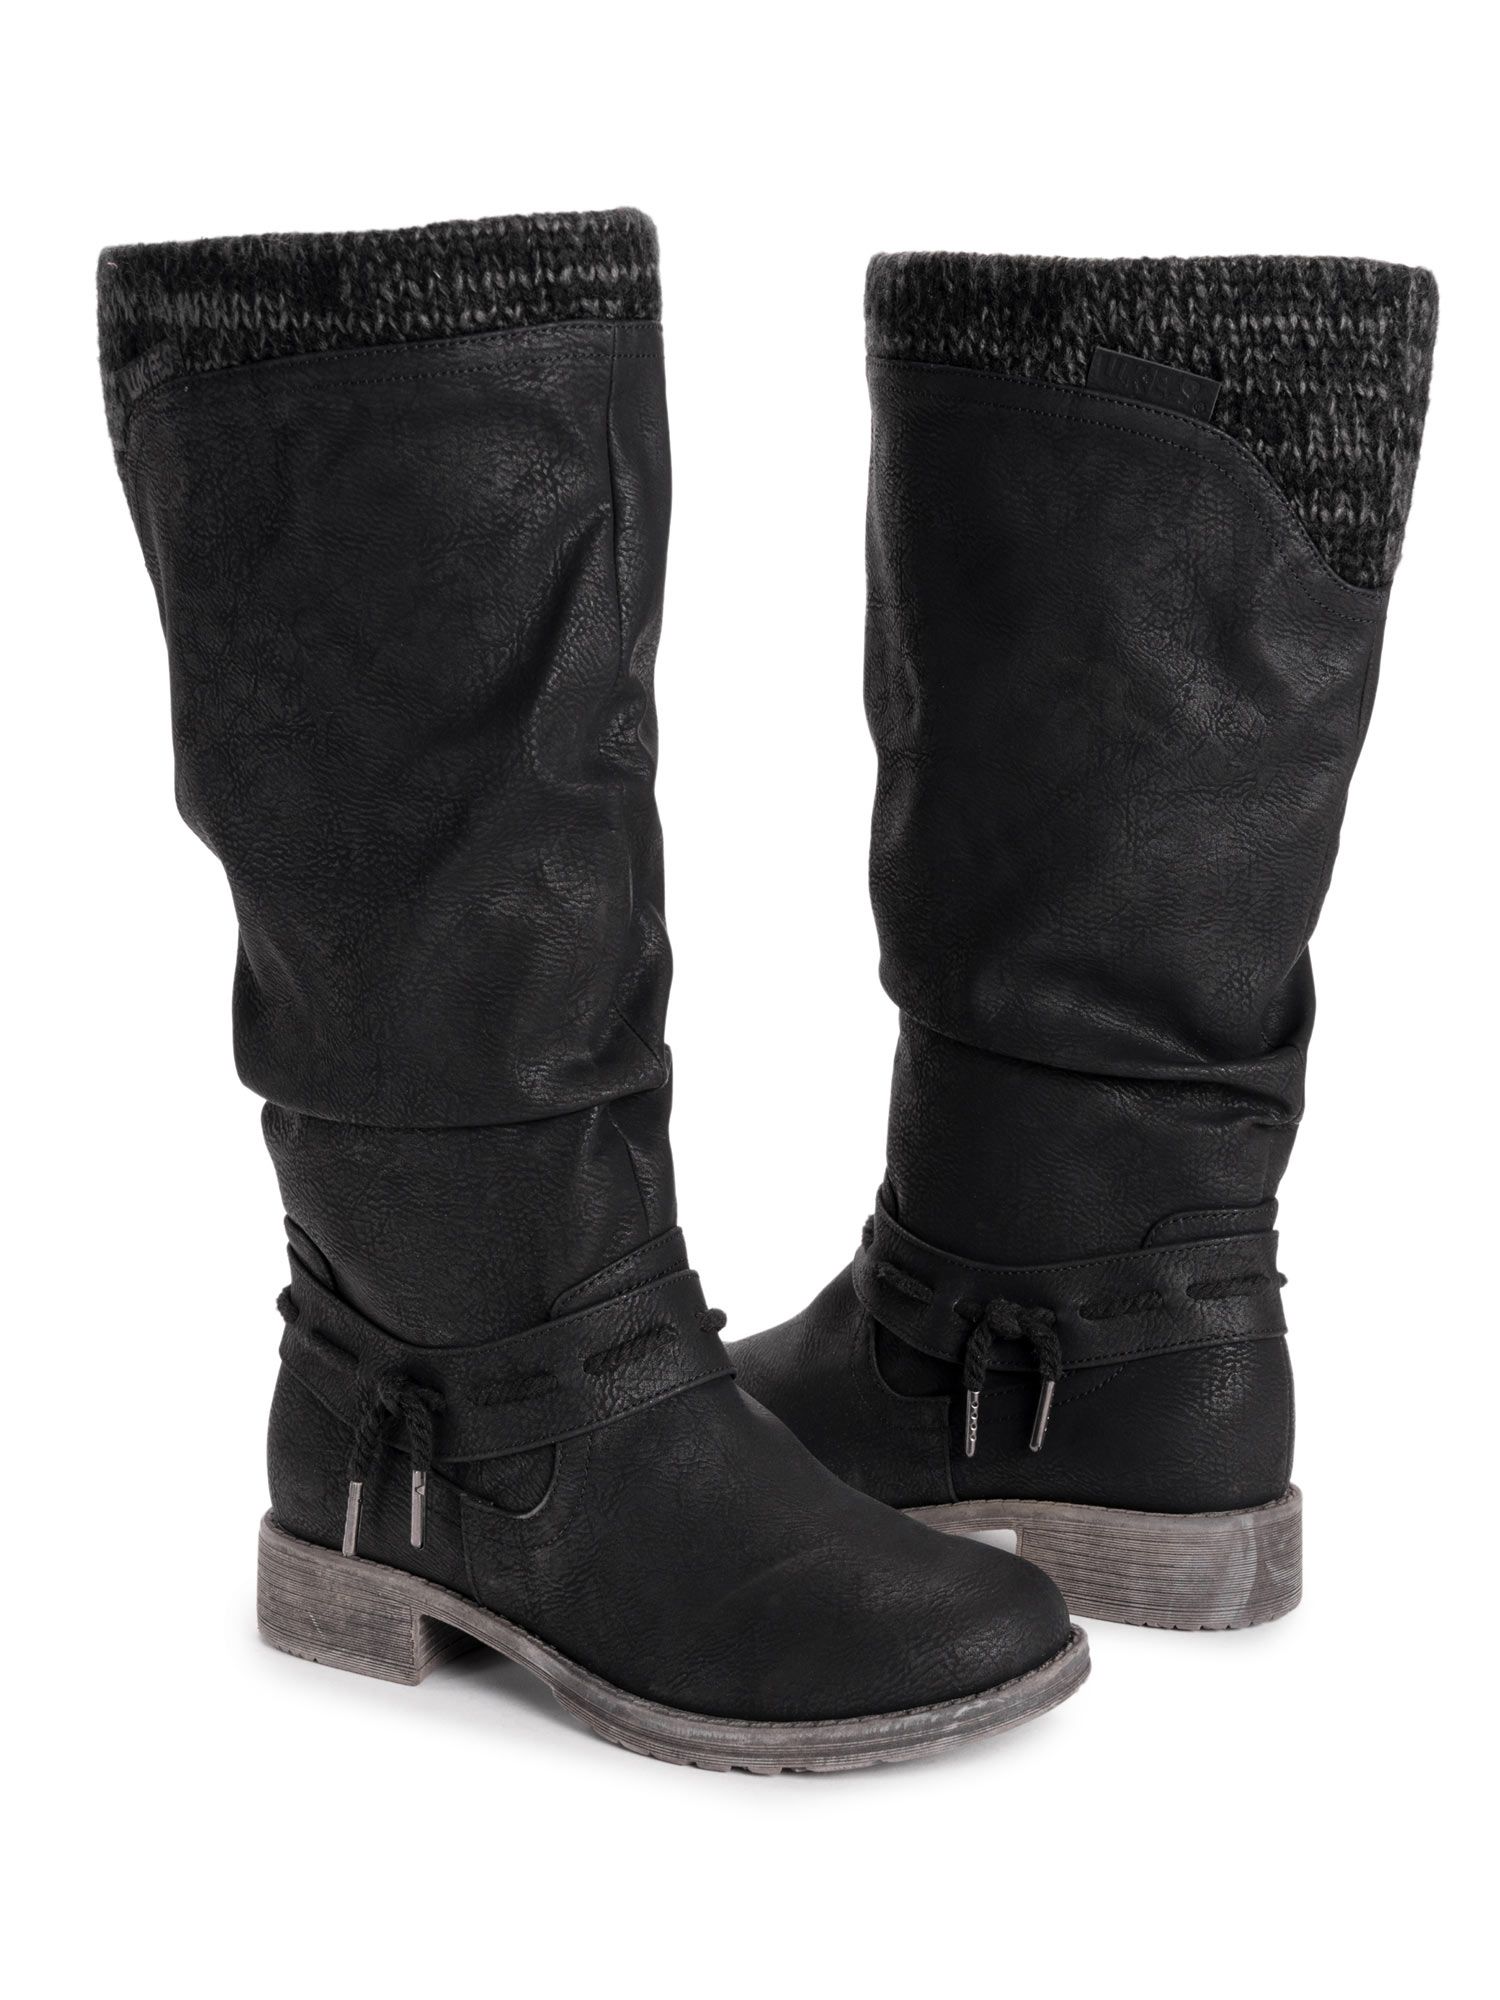 Women's Boots - Totes Moccasins & Tall Boots Women